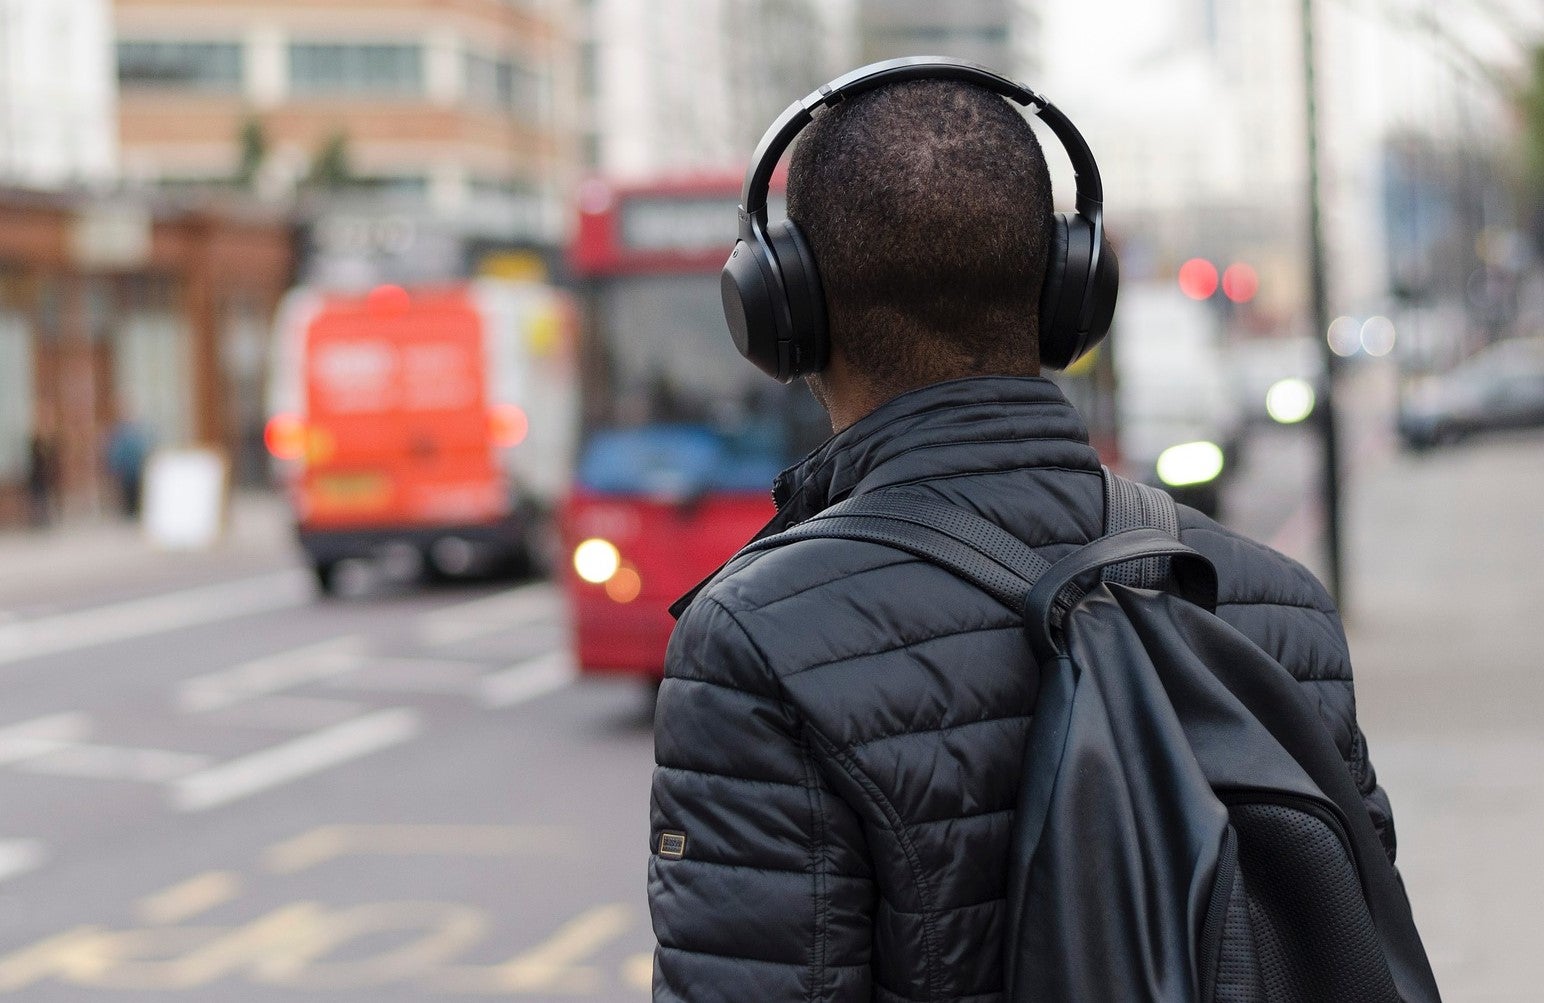 Man with headphones and backpack